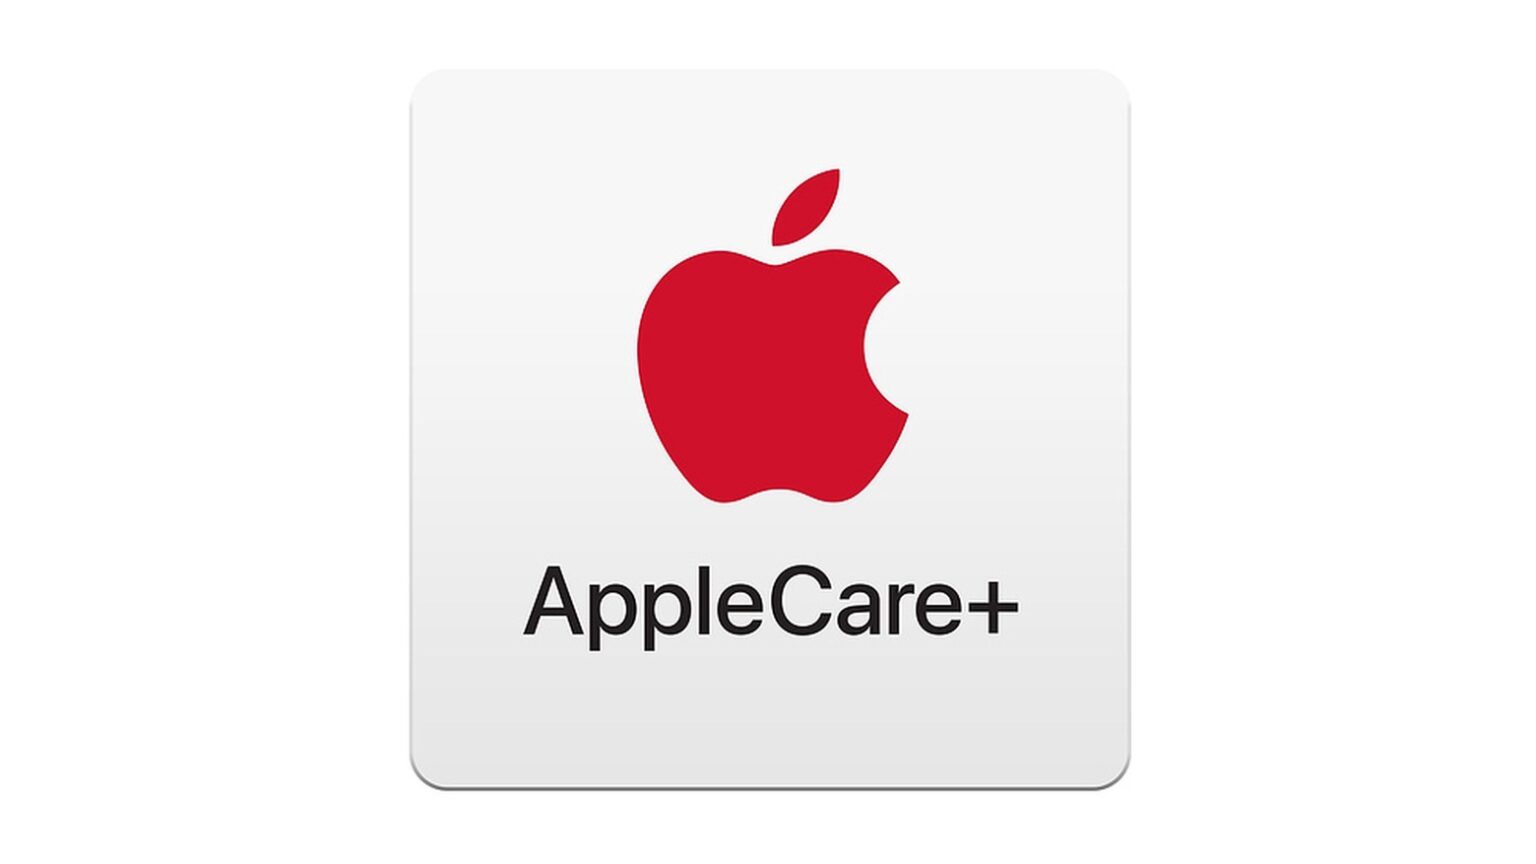 iPhone and Mac get another opportunity at AppleCare+ coverage after expensive repair